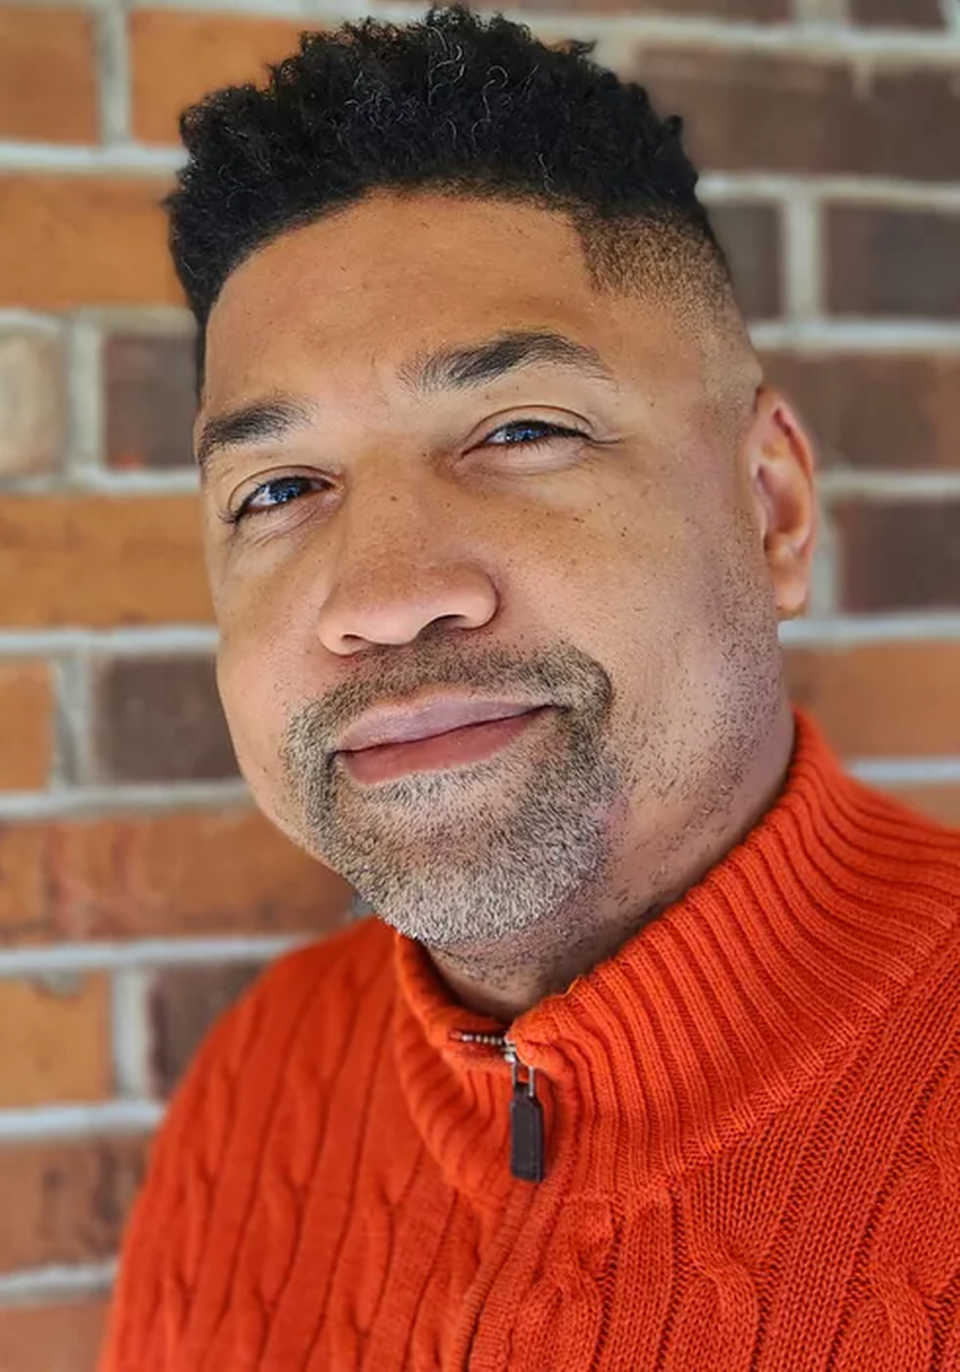 Shawn Pryor is a graphic novel author based in Lexington. Pryor began volunteering in April for a creative writing and comic book class at Winburn Middle School, where he met 13-year-old Deon Williams.